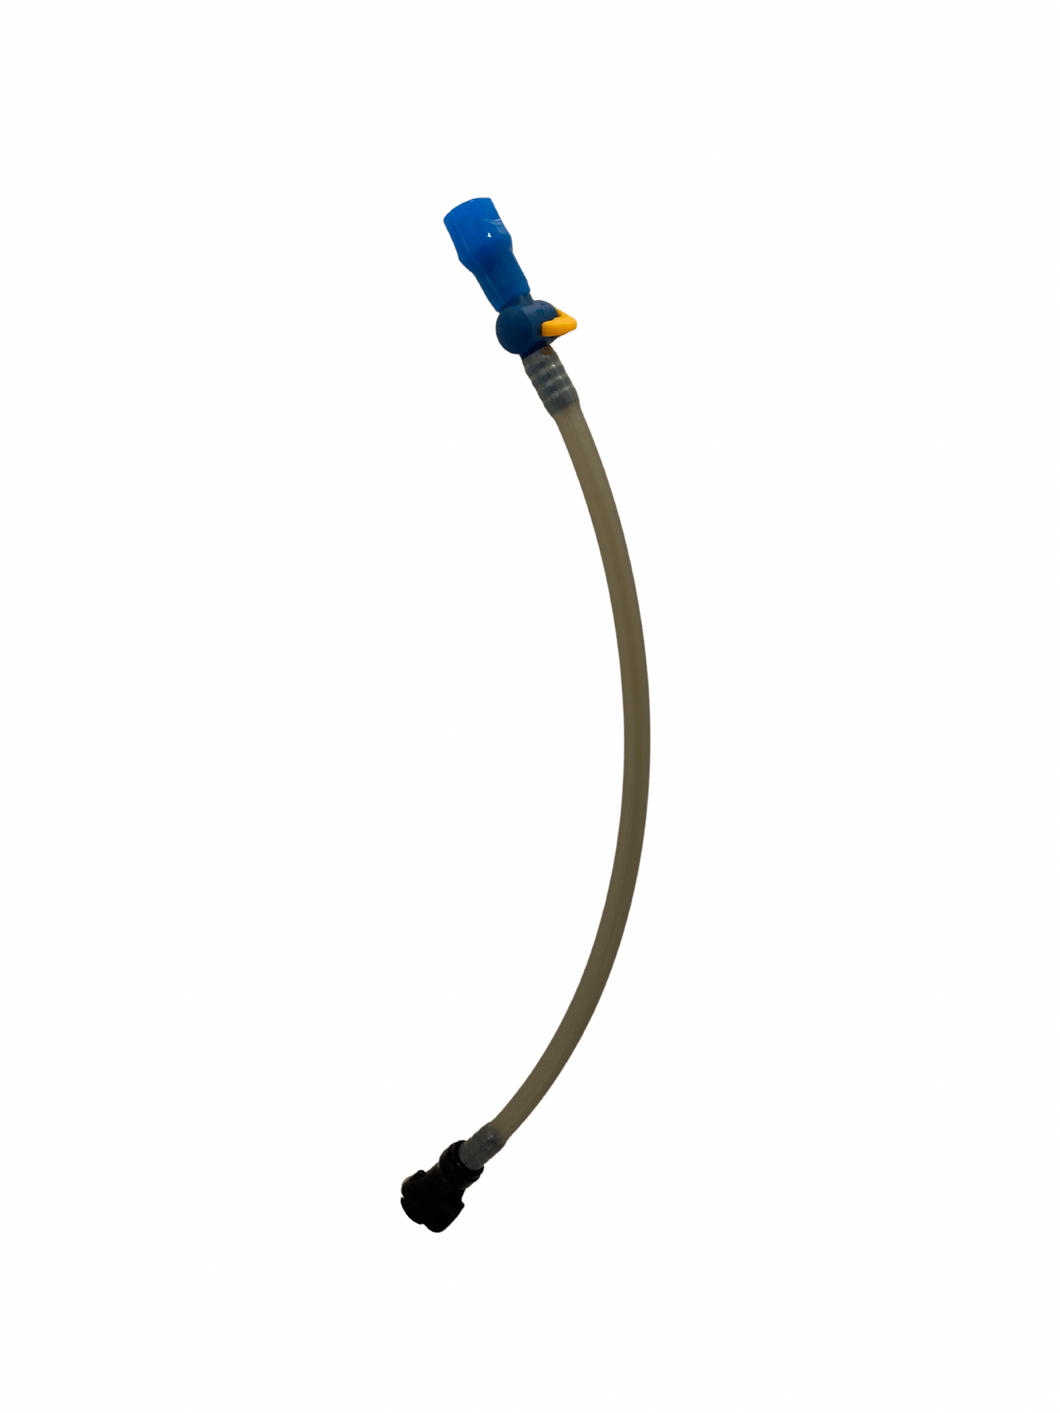 Bite valve with hose to connect to your Ezifill connection hose